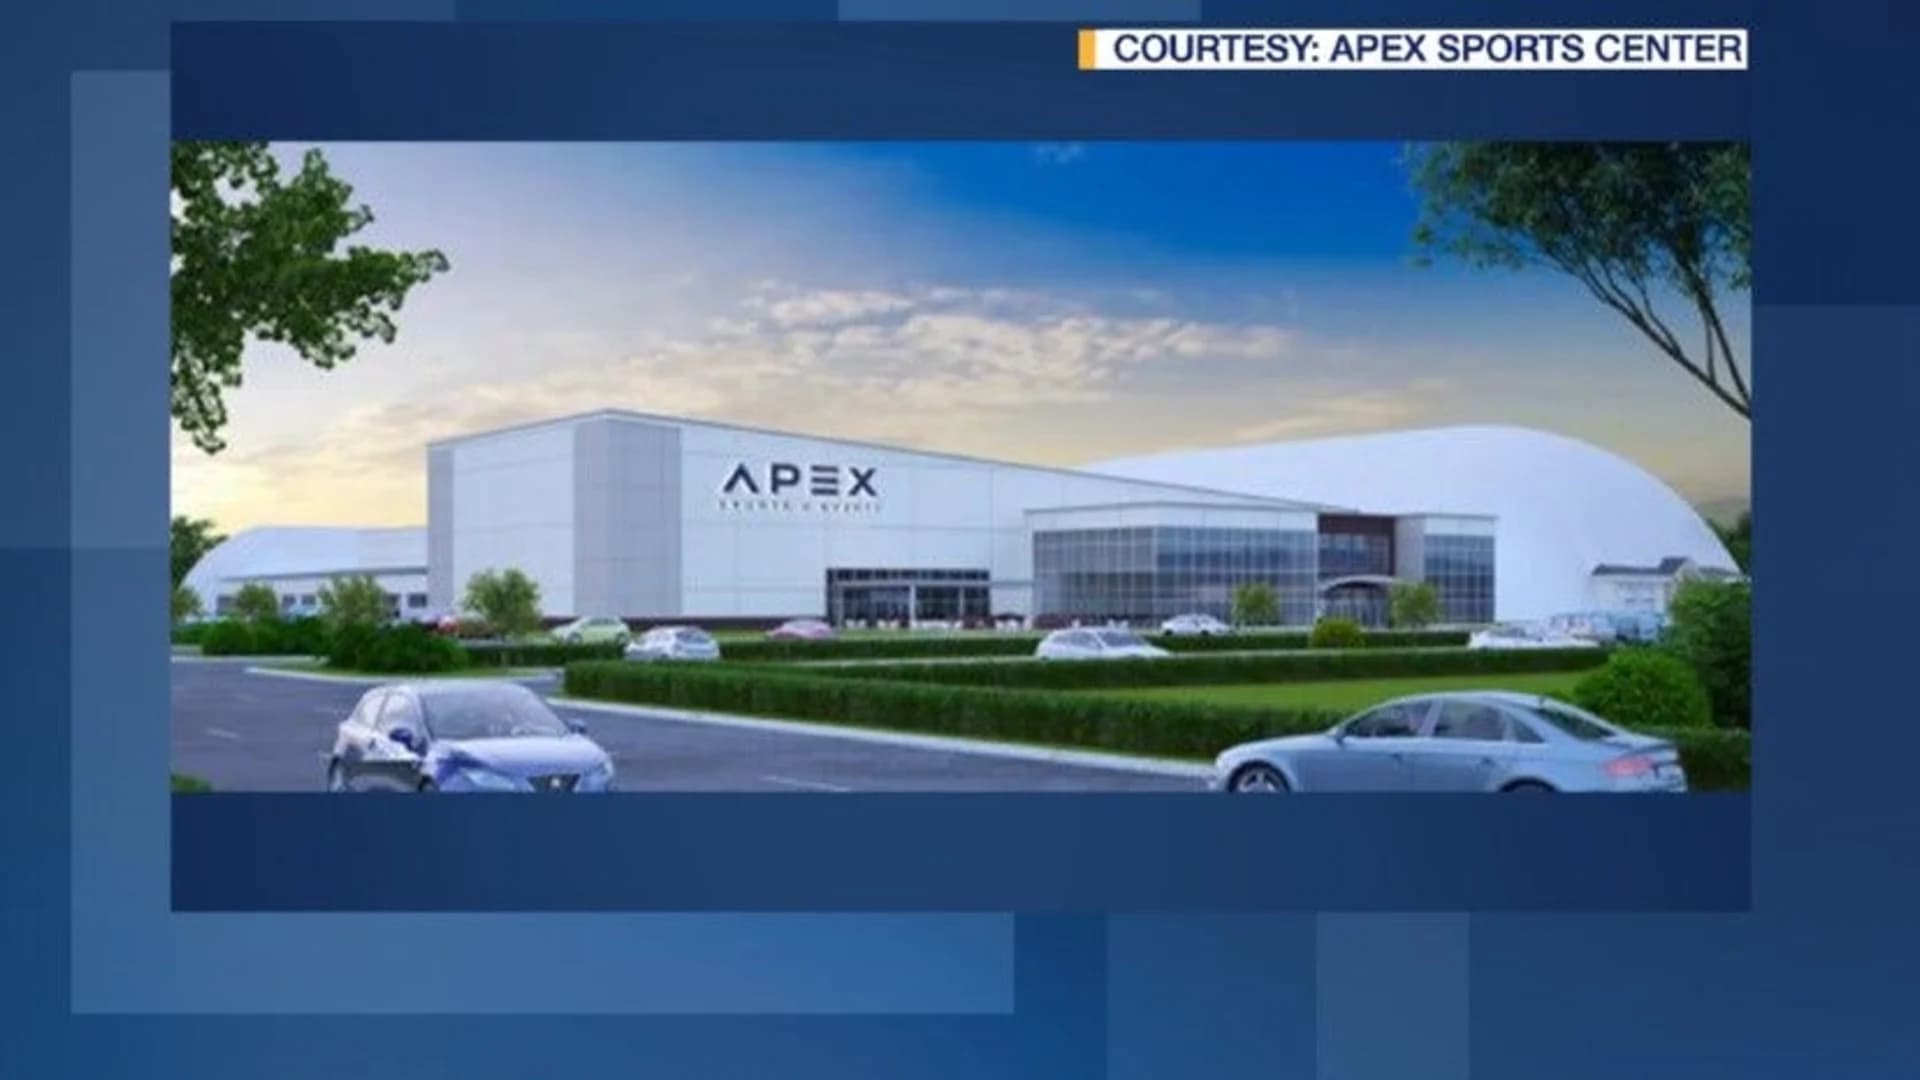 Hiring has begun -- Apex sports complex coming to New Jersey